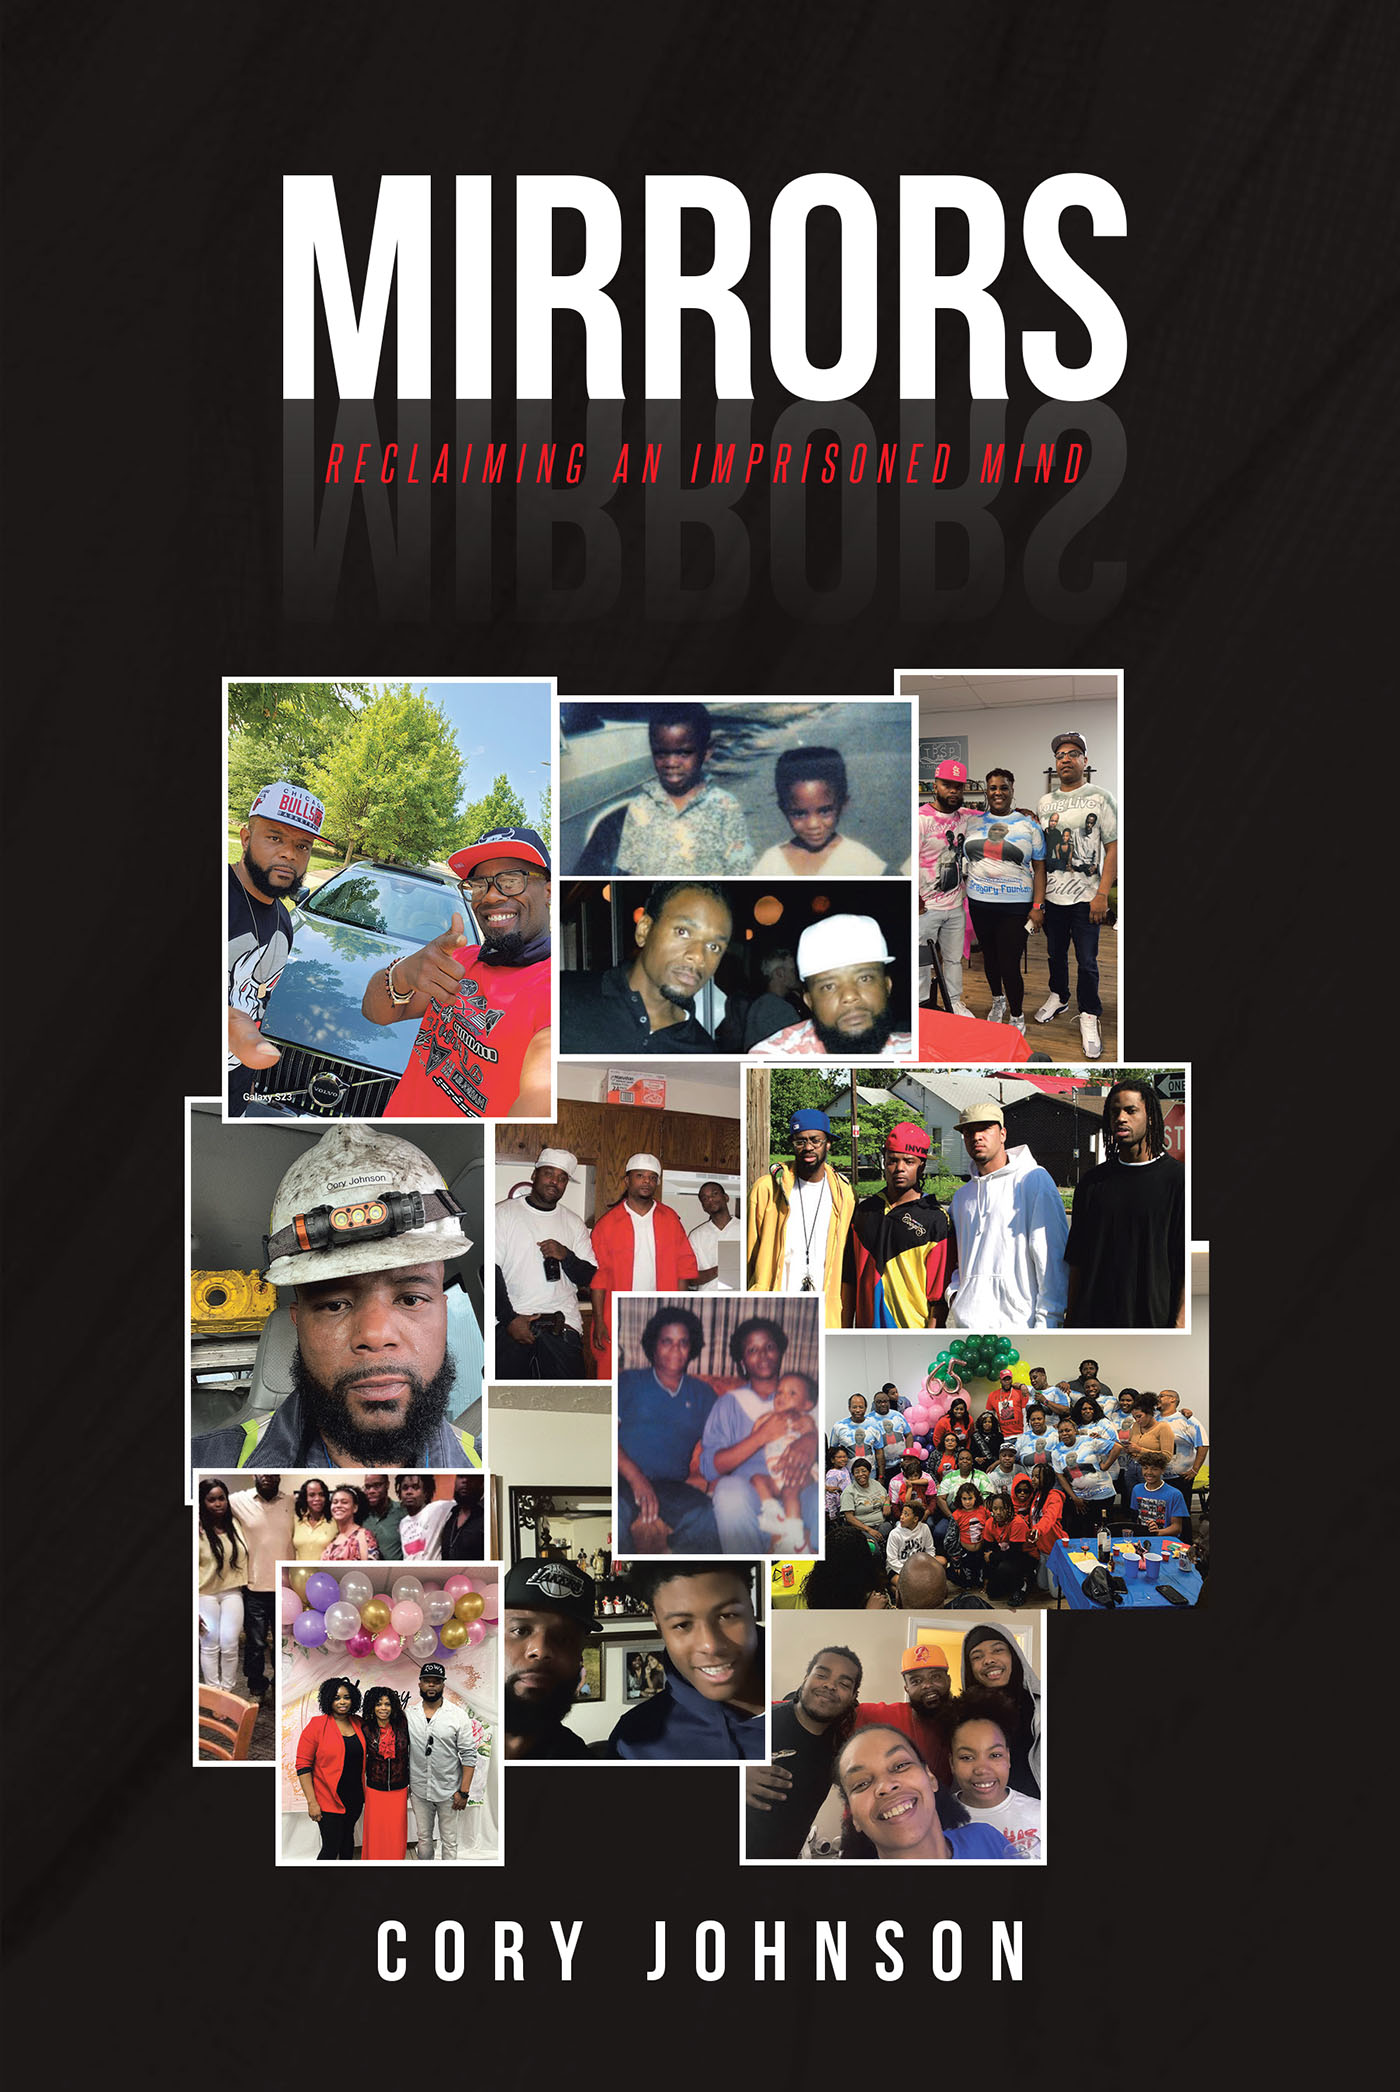 Author Cory Johnson’s New Book, "Mirrors: Reclaiming An Imprisoned Mind," is an Eye-Opening Look at How the Author Broke Free from His Past to Ensure a Brighter Future